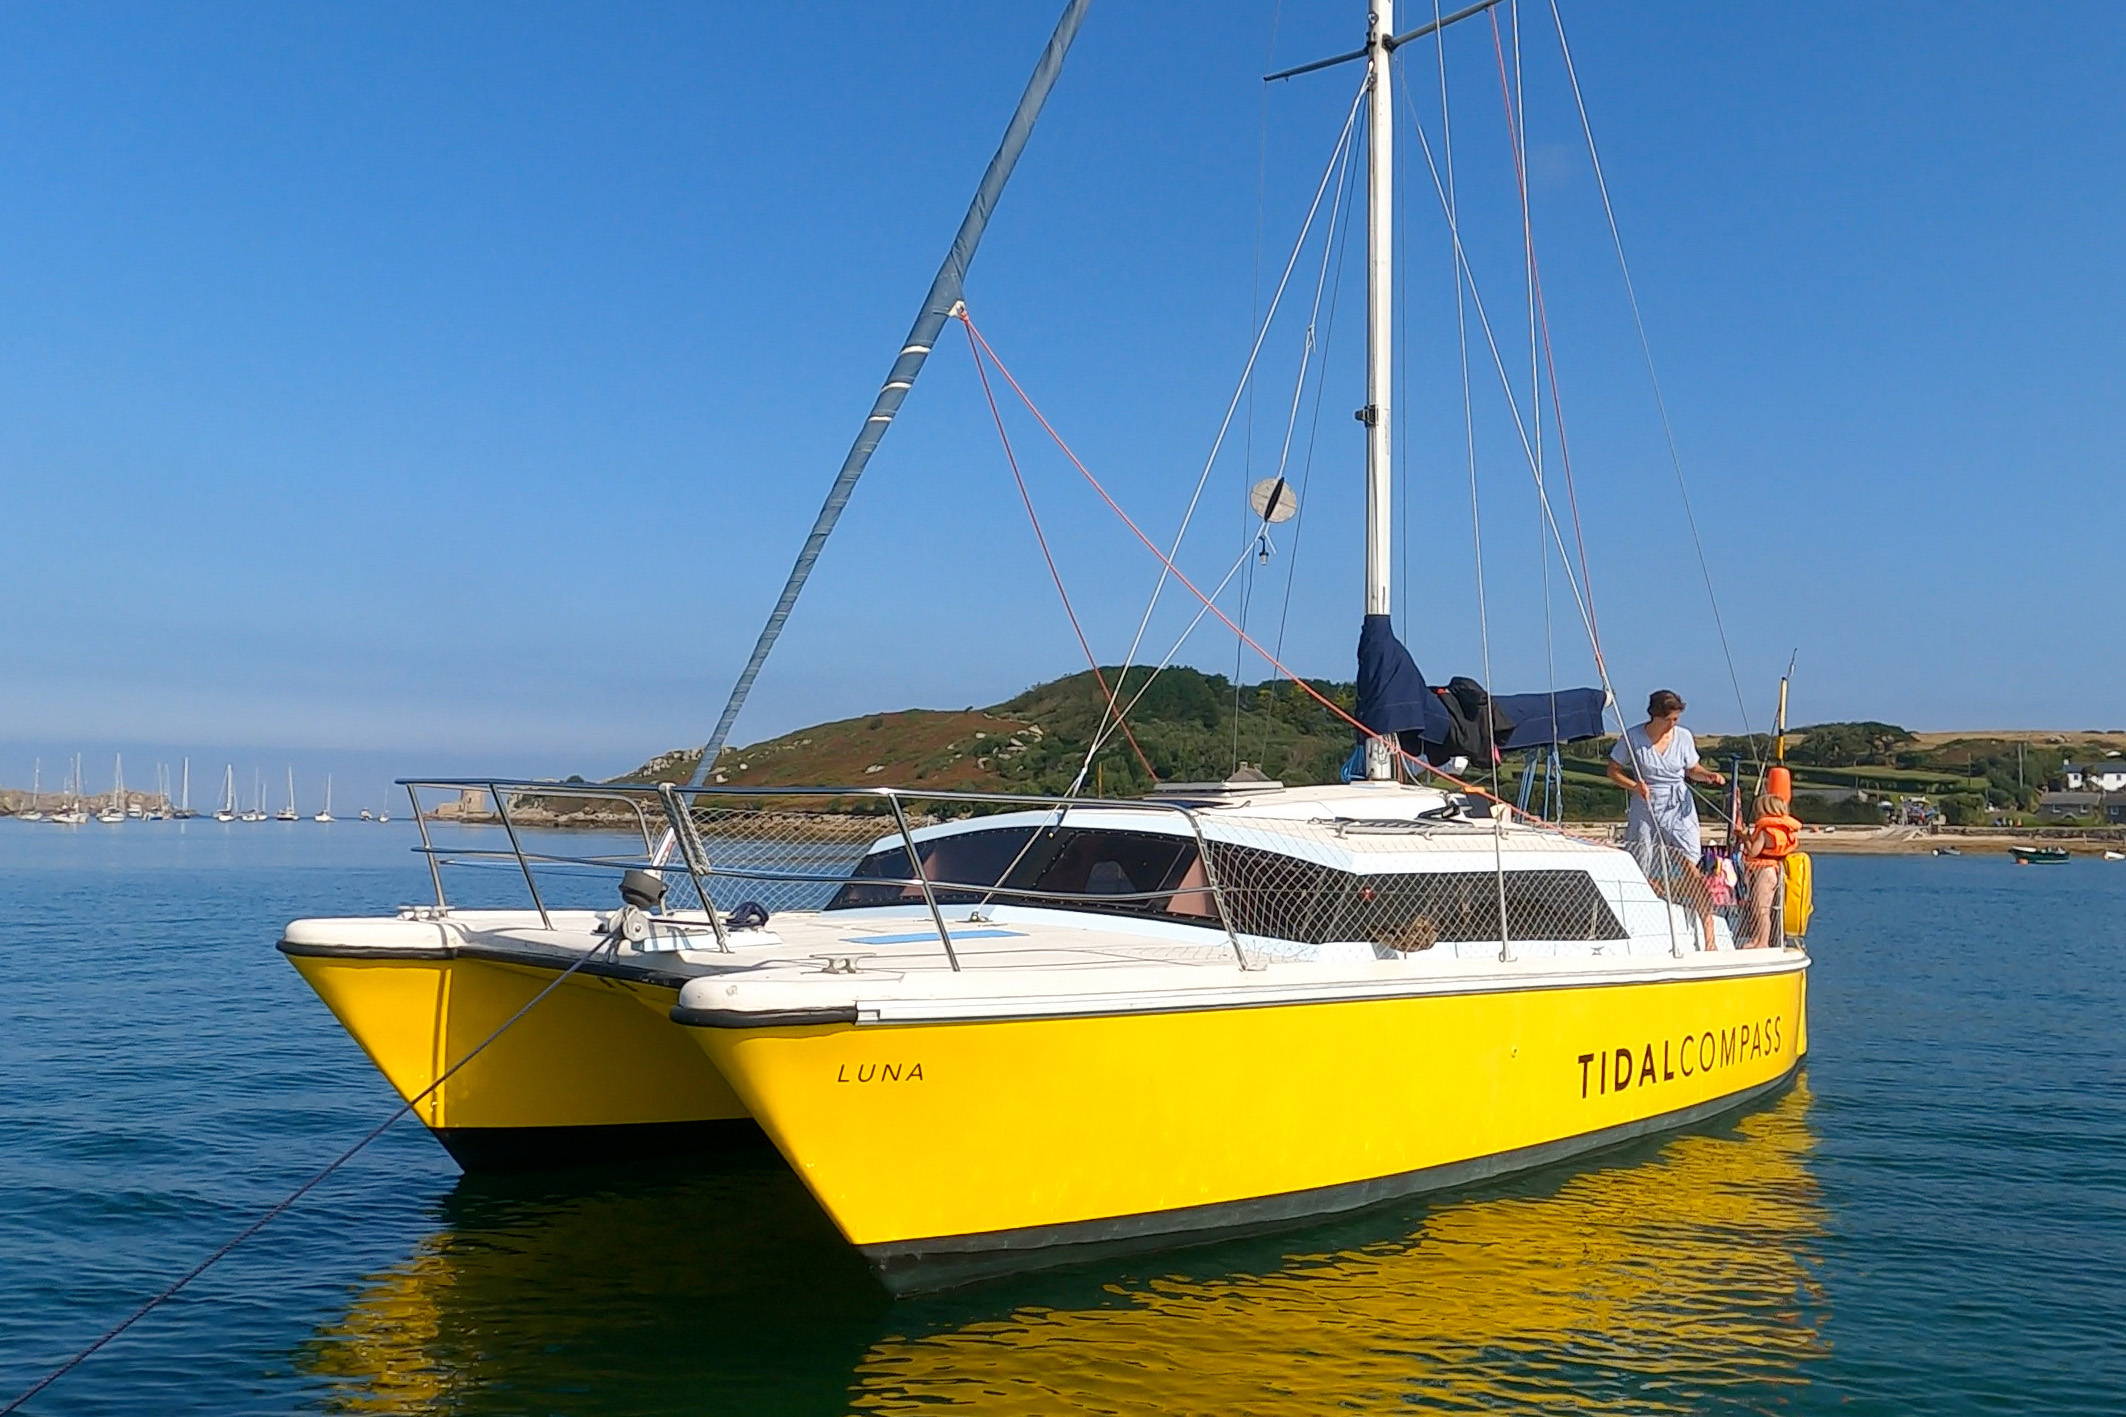 Luna the Tidal School catamaran in the isles of scilly before setting off to France